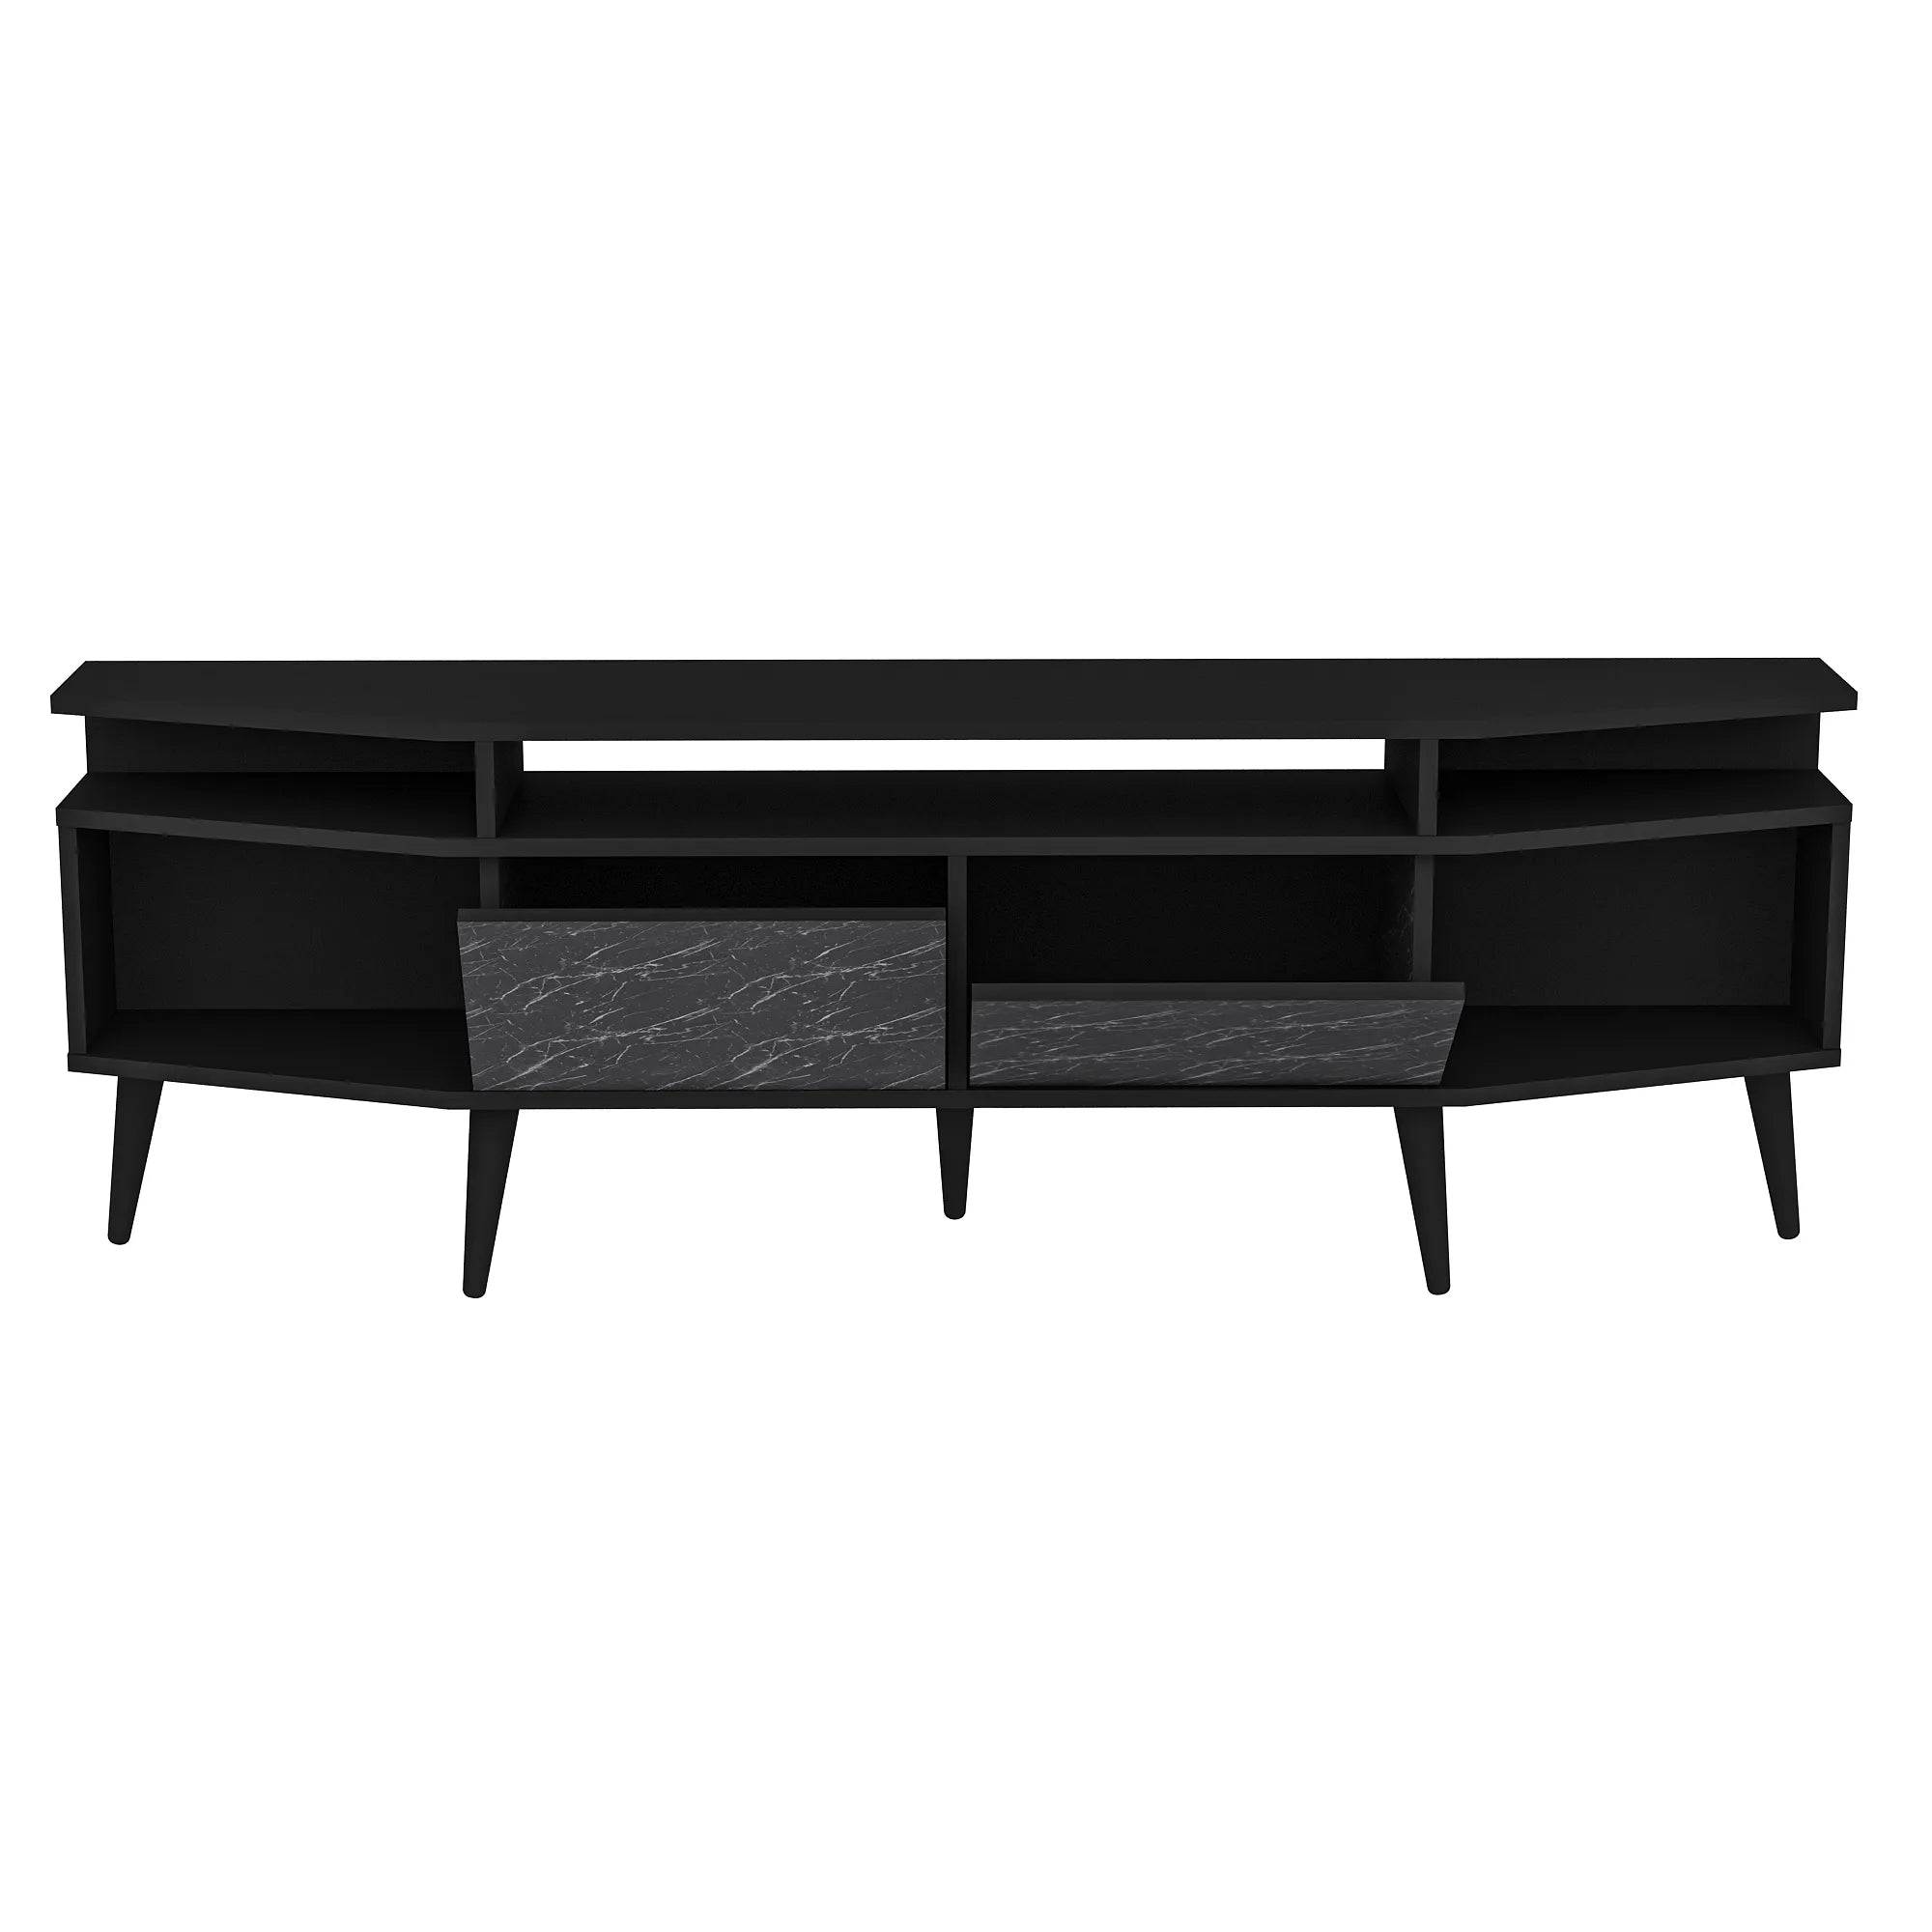 Dennis 71 in Wide Modern TV Stand Media Console with Storage for TVs up to 80 in